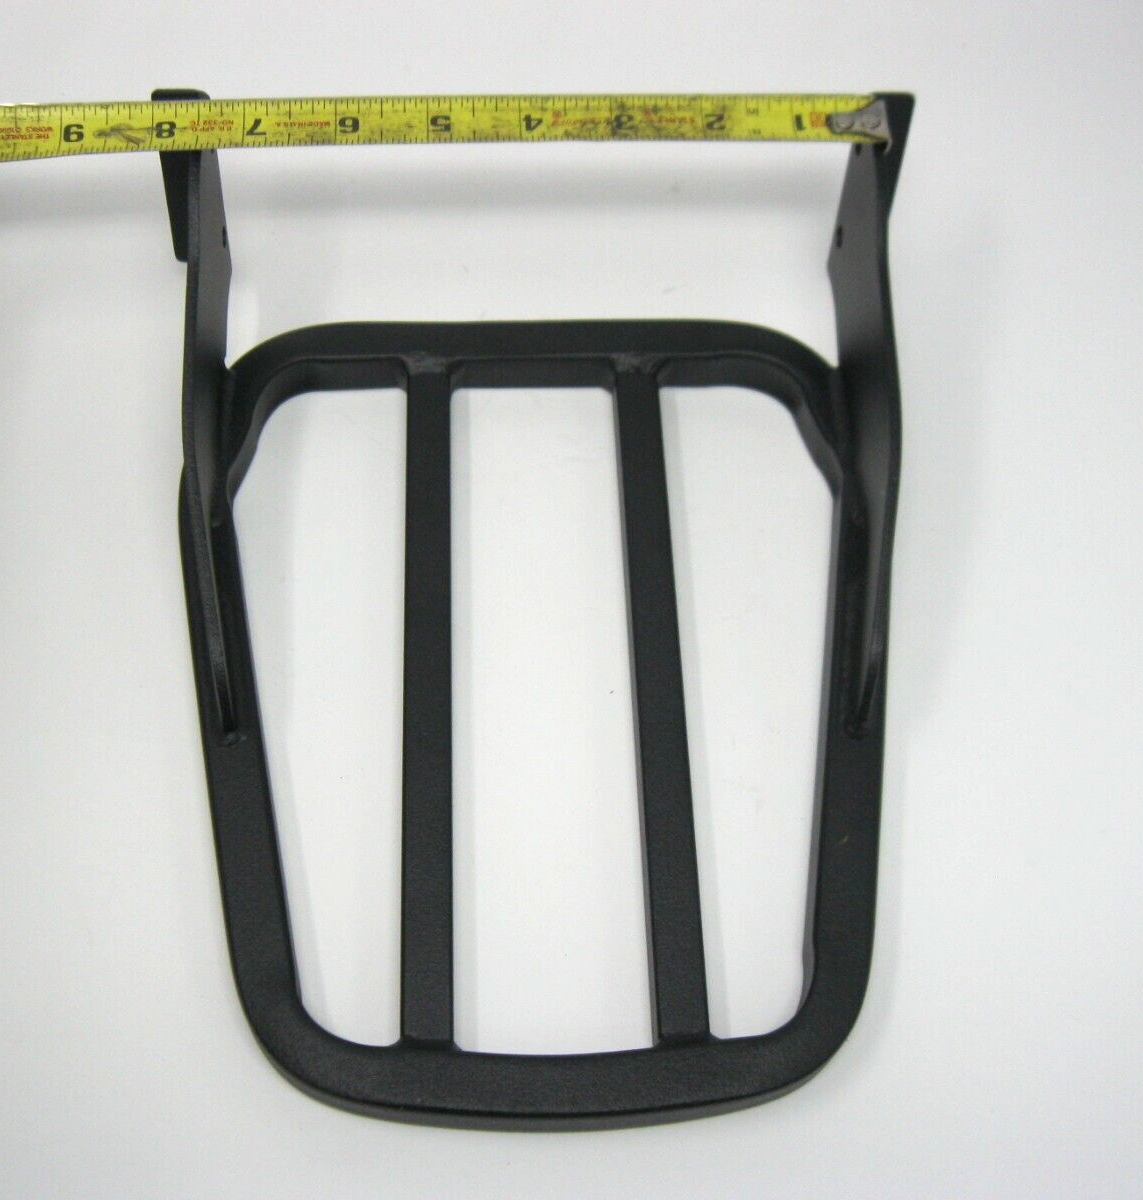 Sissy Bar Mounted Black Luggage Rack for 7.5" Wide Uprights